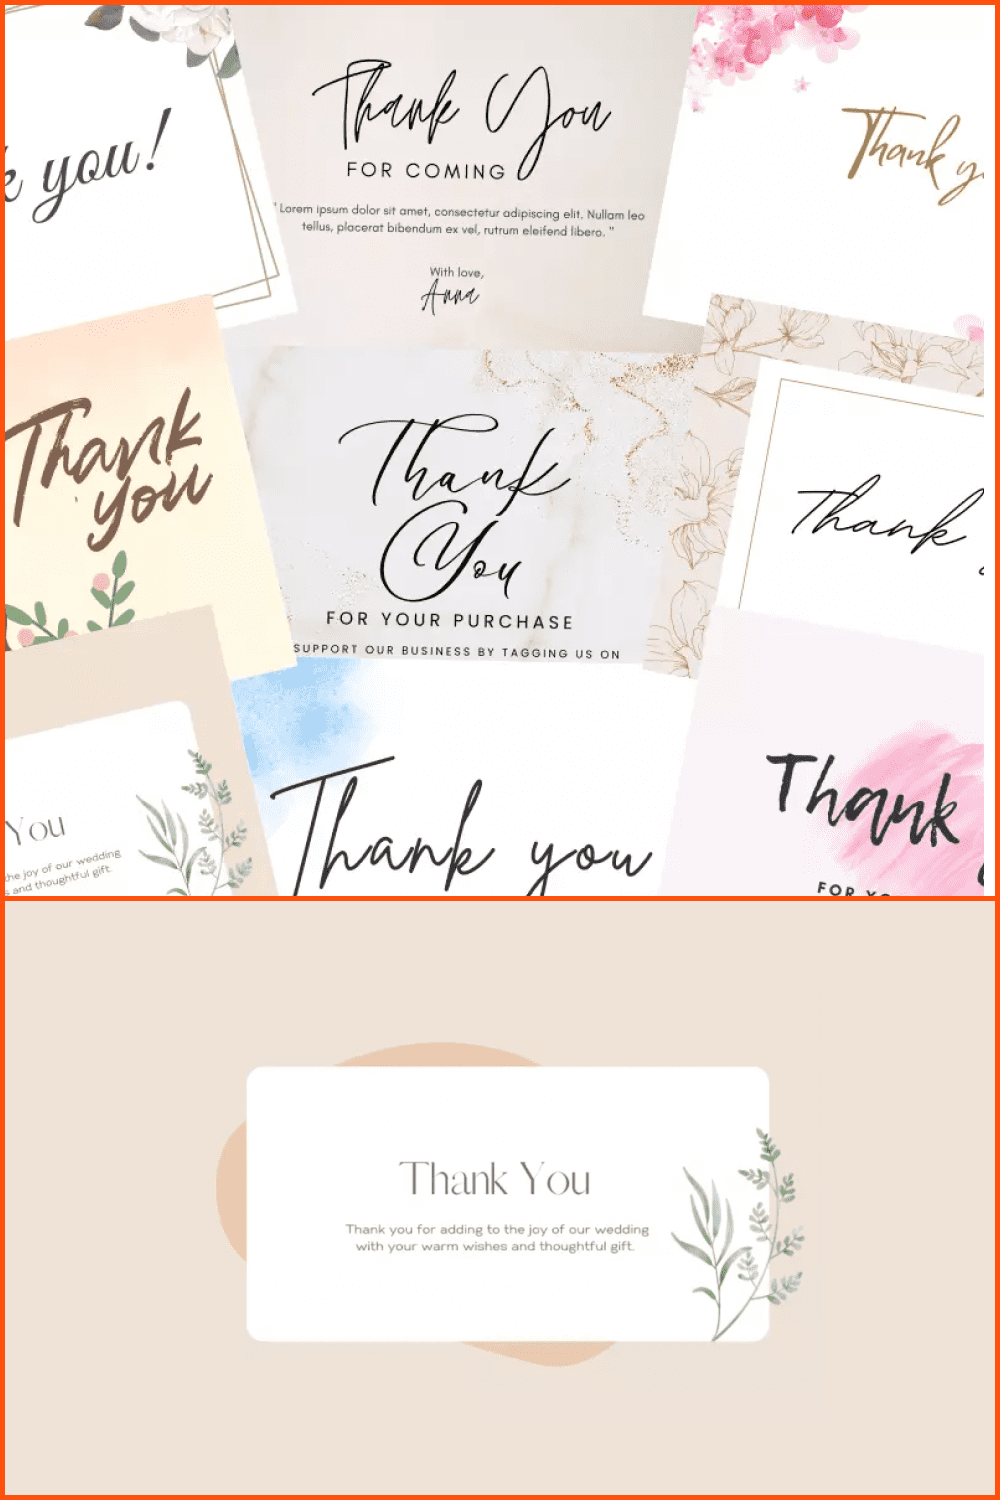 Collage of images of greeting cards with the inscription Thank you.